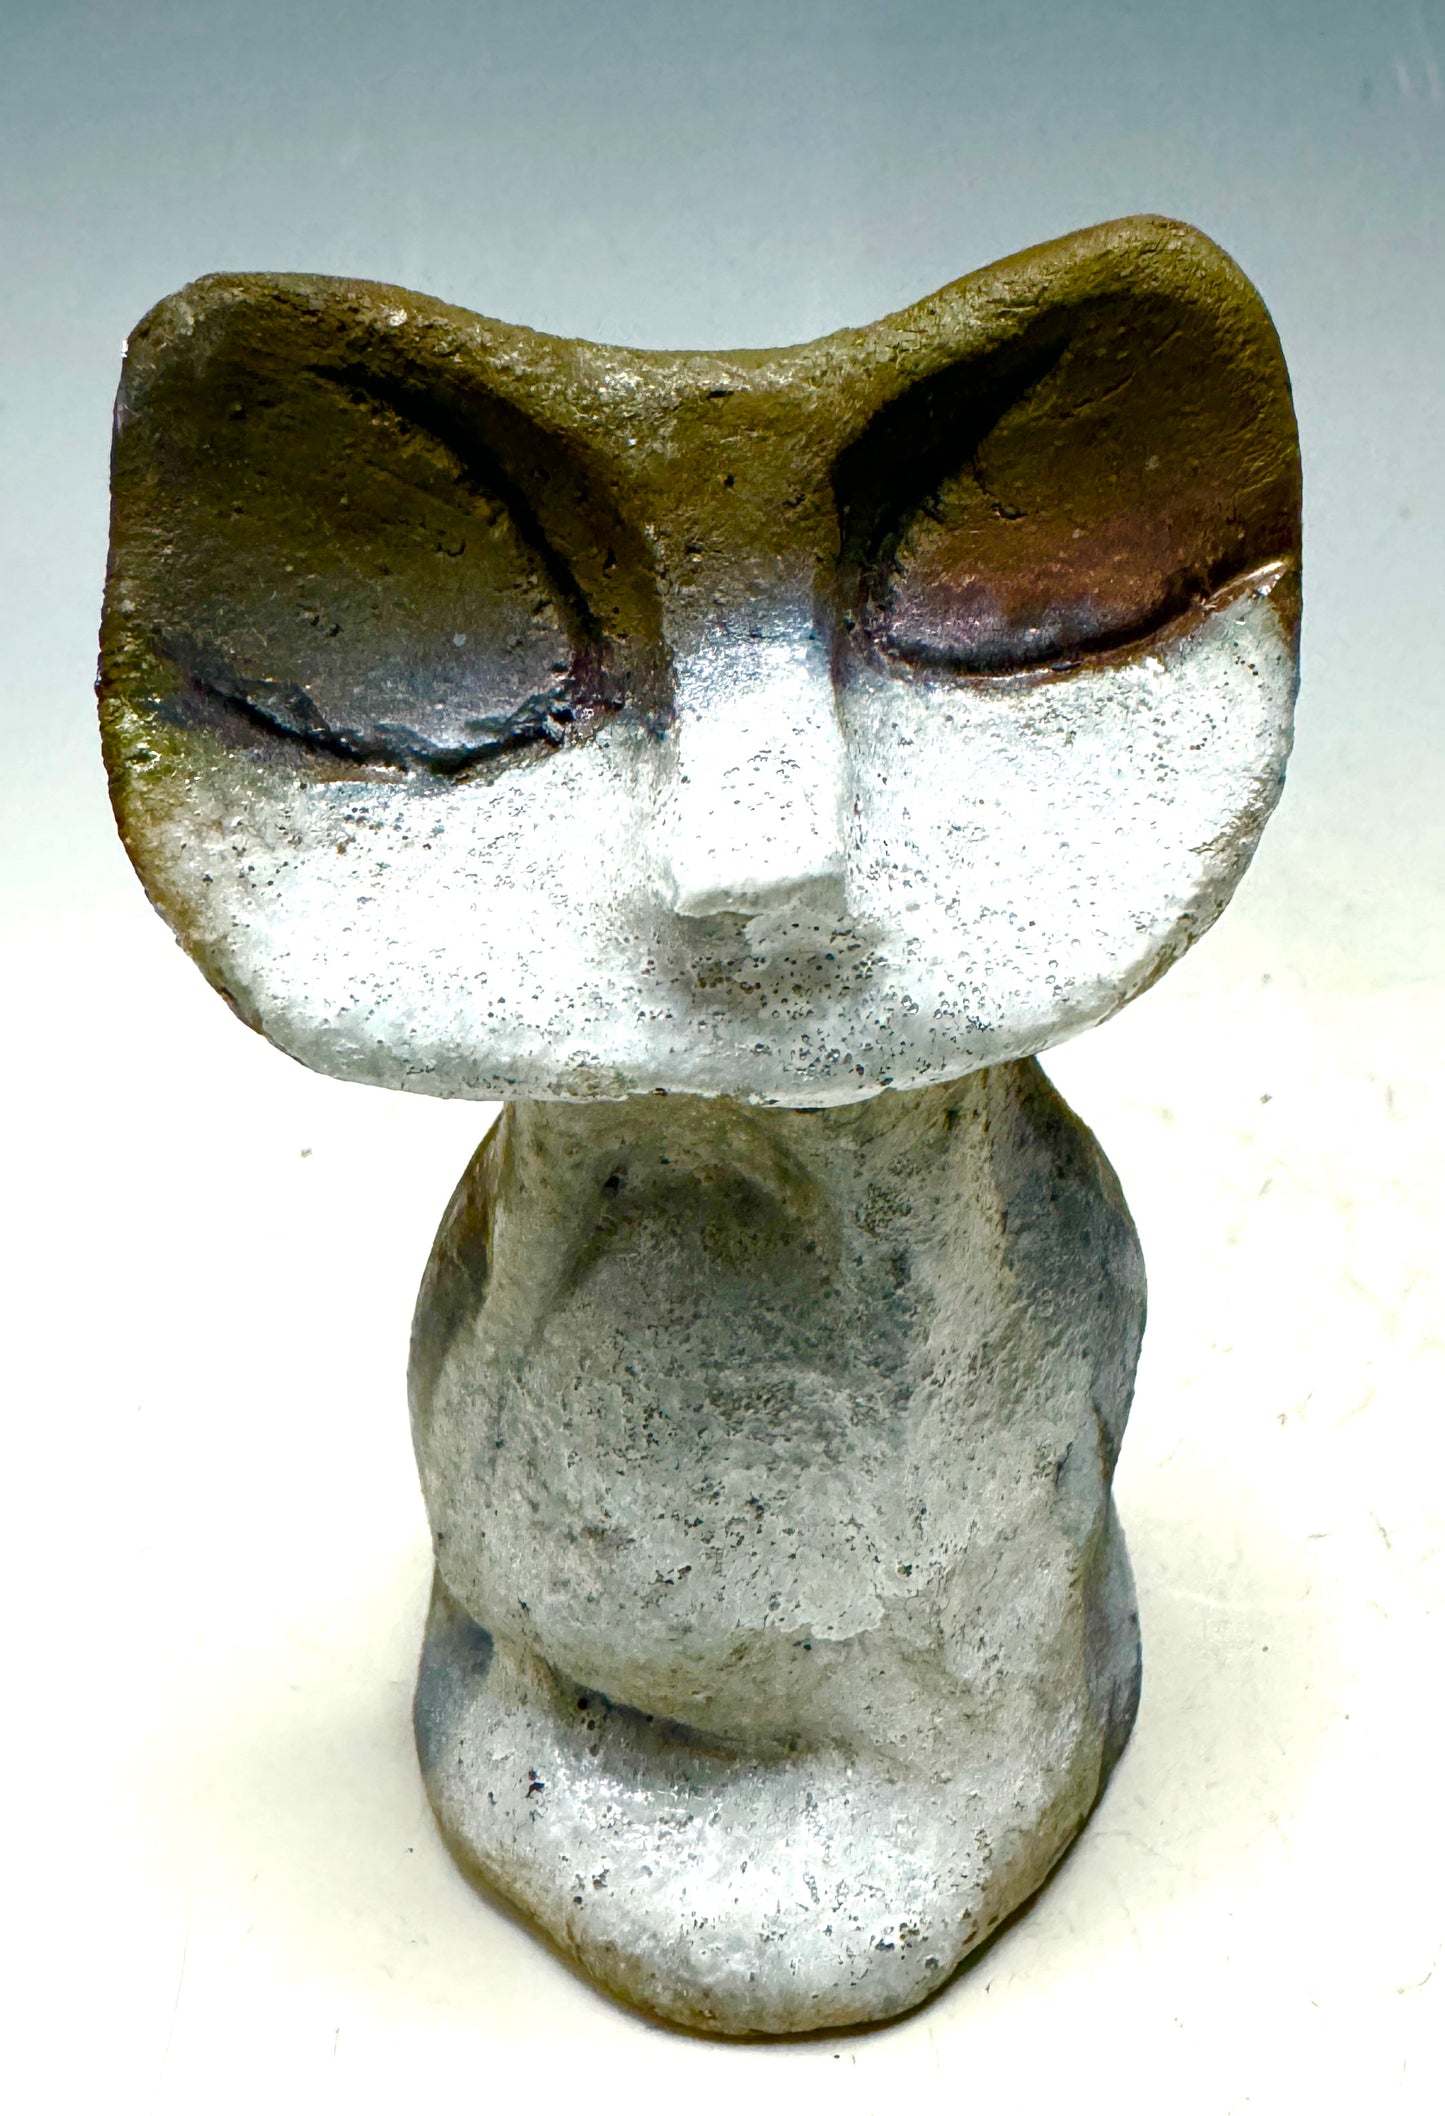 Welcome HK-3, the most adorably purr-fect feline friend about! At only 4' x 2" x 2", she's totally lightweight and ready to make any room happier. Her happy gray color shimmering and her 5 oz. mass sure to bring a smile to your face. Invite bliss into your home with this delightful kitty-cat cutie!